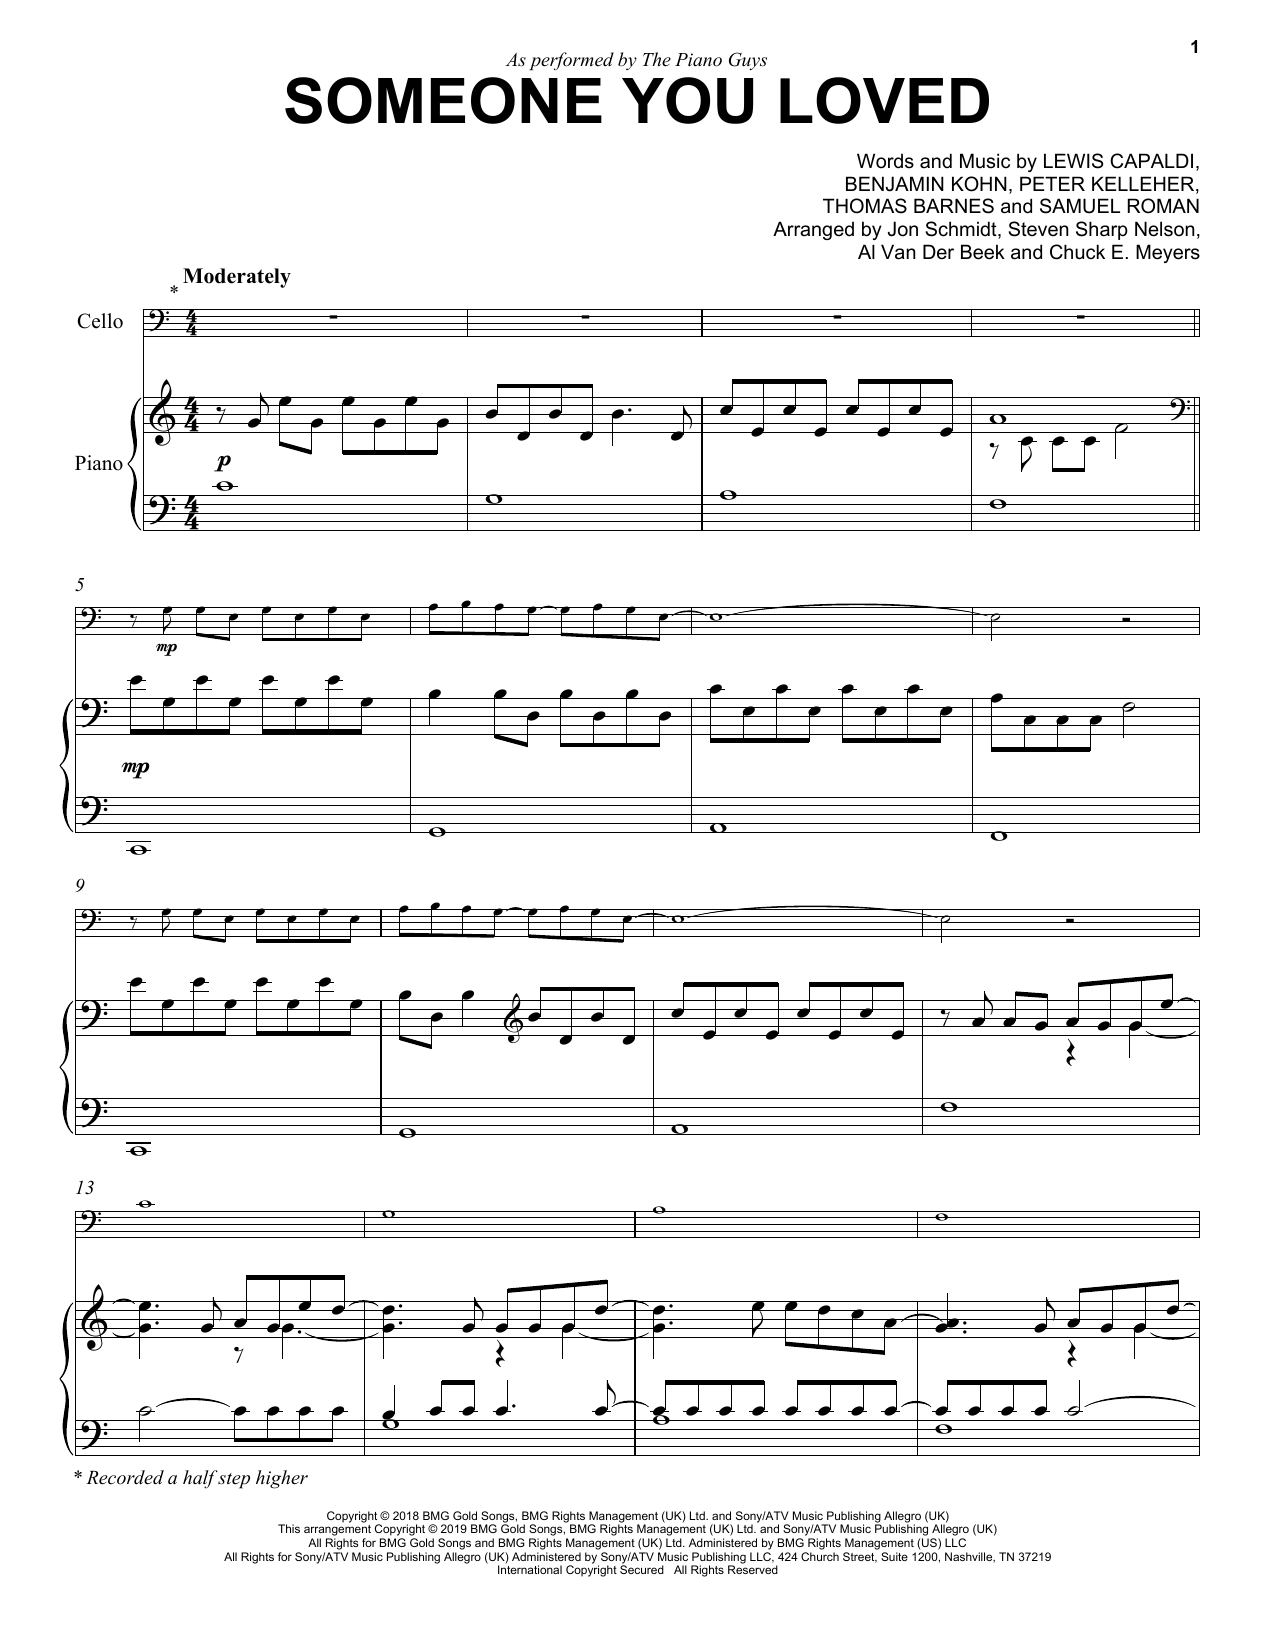 Download The Piano Guys Someone You Loved Sheet Music